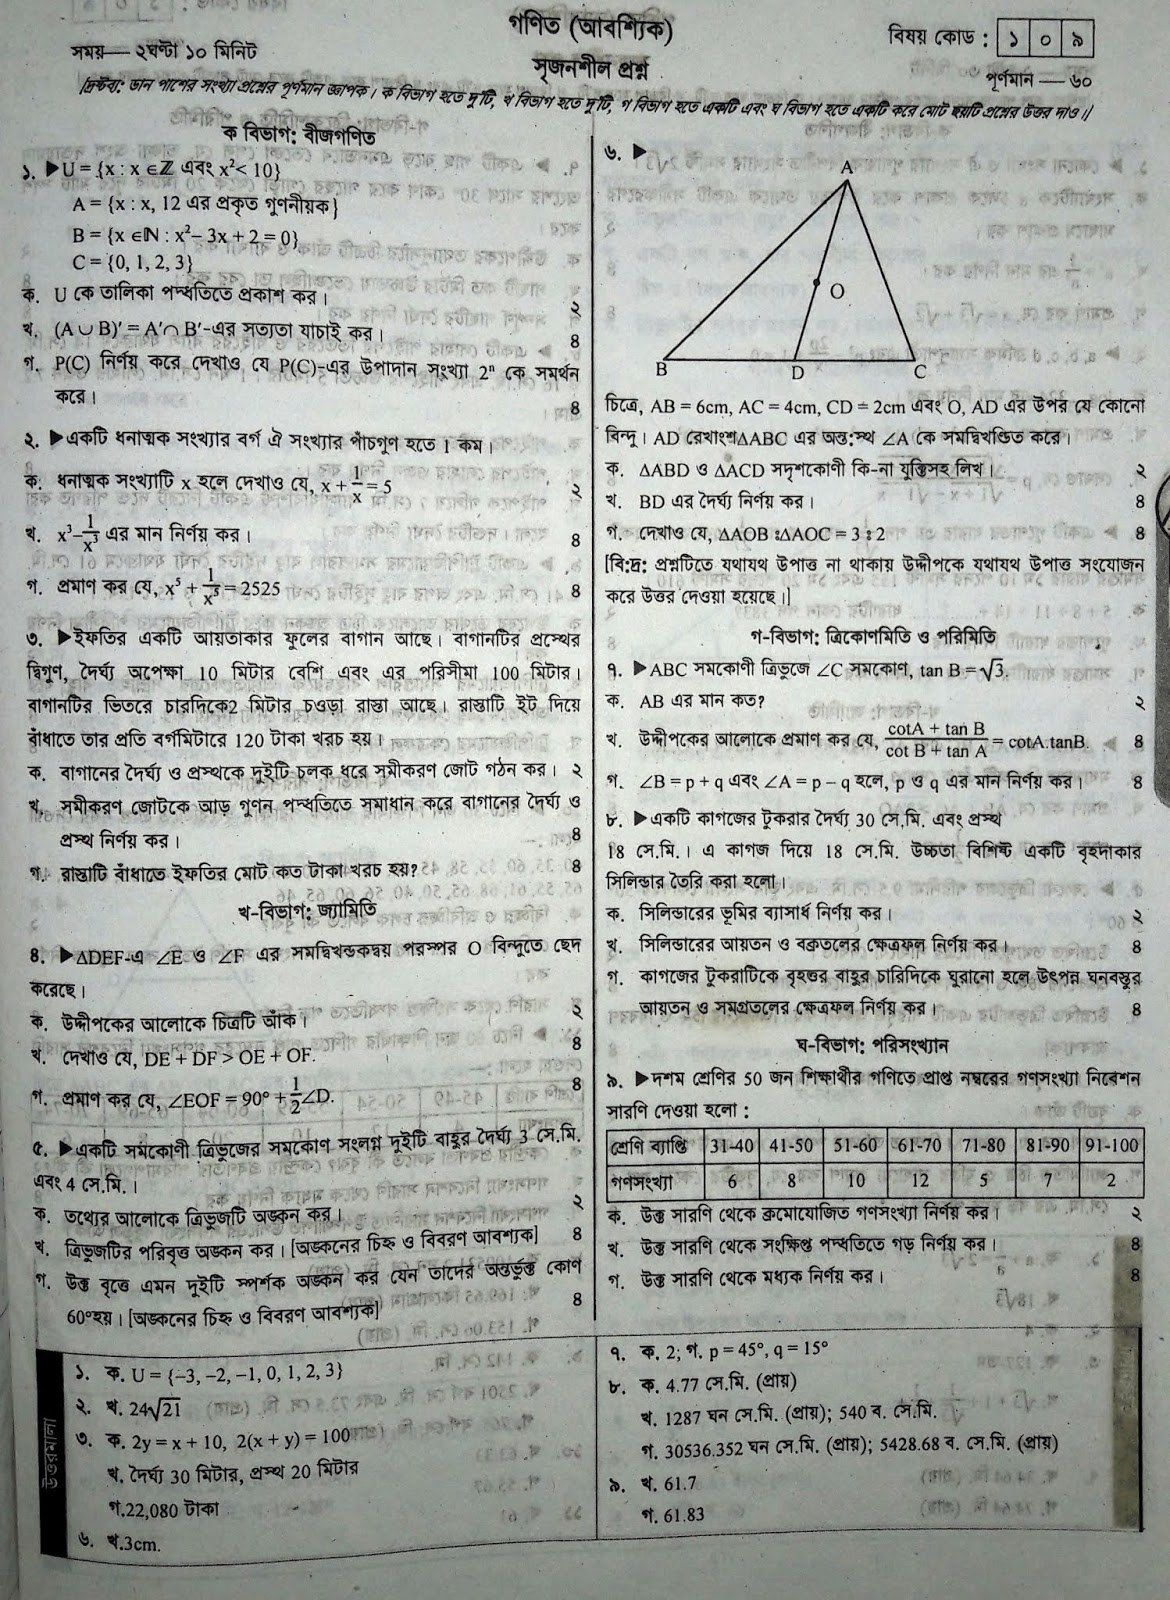 SSC General Math suggestion, question paper, model question, mcq question, question pattern, syllabus for dhaka board, all boards